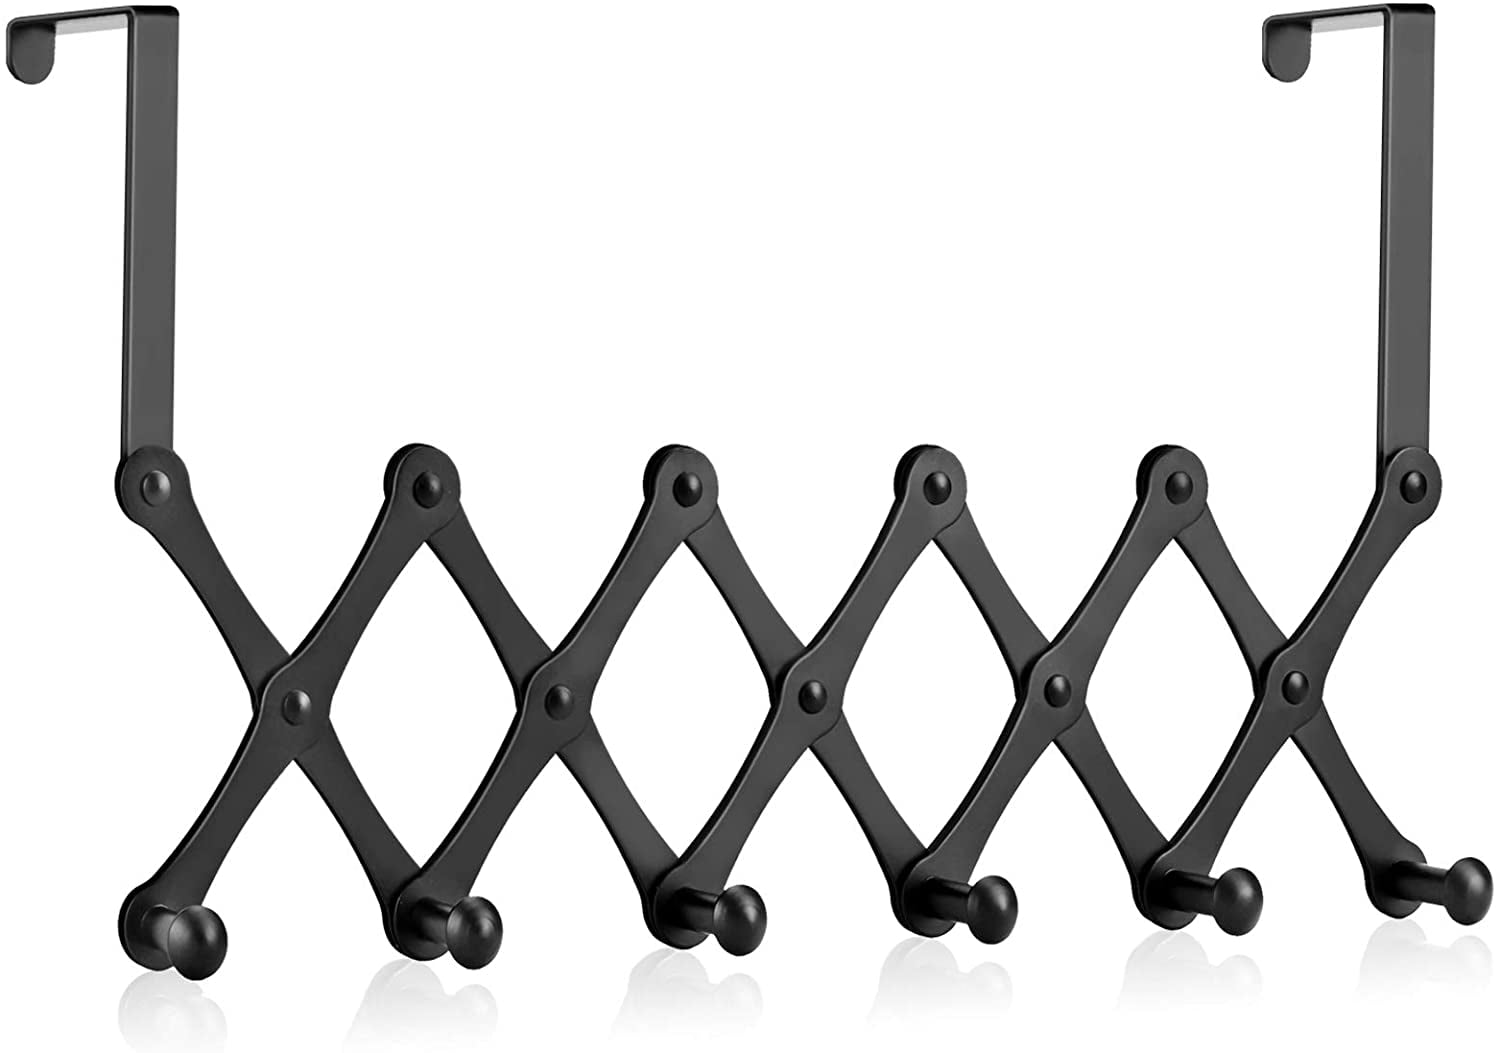 2 Pack Over The Door Double Hooks Hanger Metal and Crystal Design for Hanging Towel Coats Clothes Hats Bags Bathroom Black